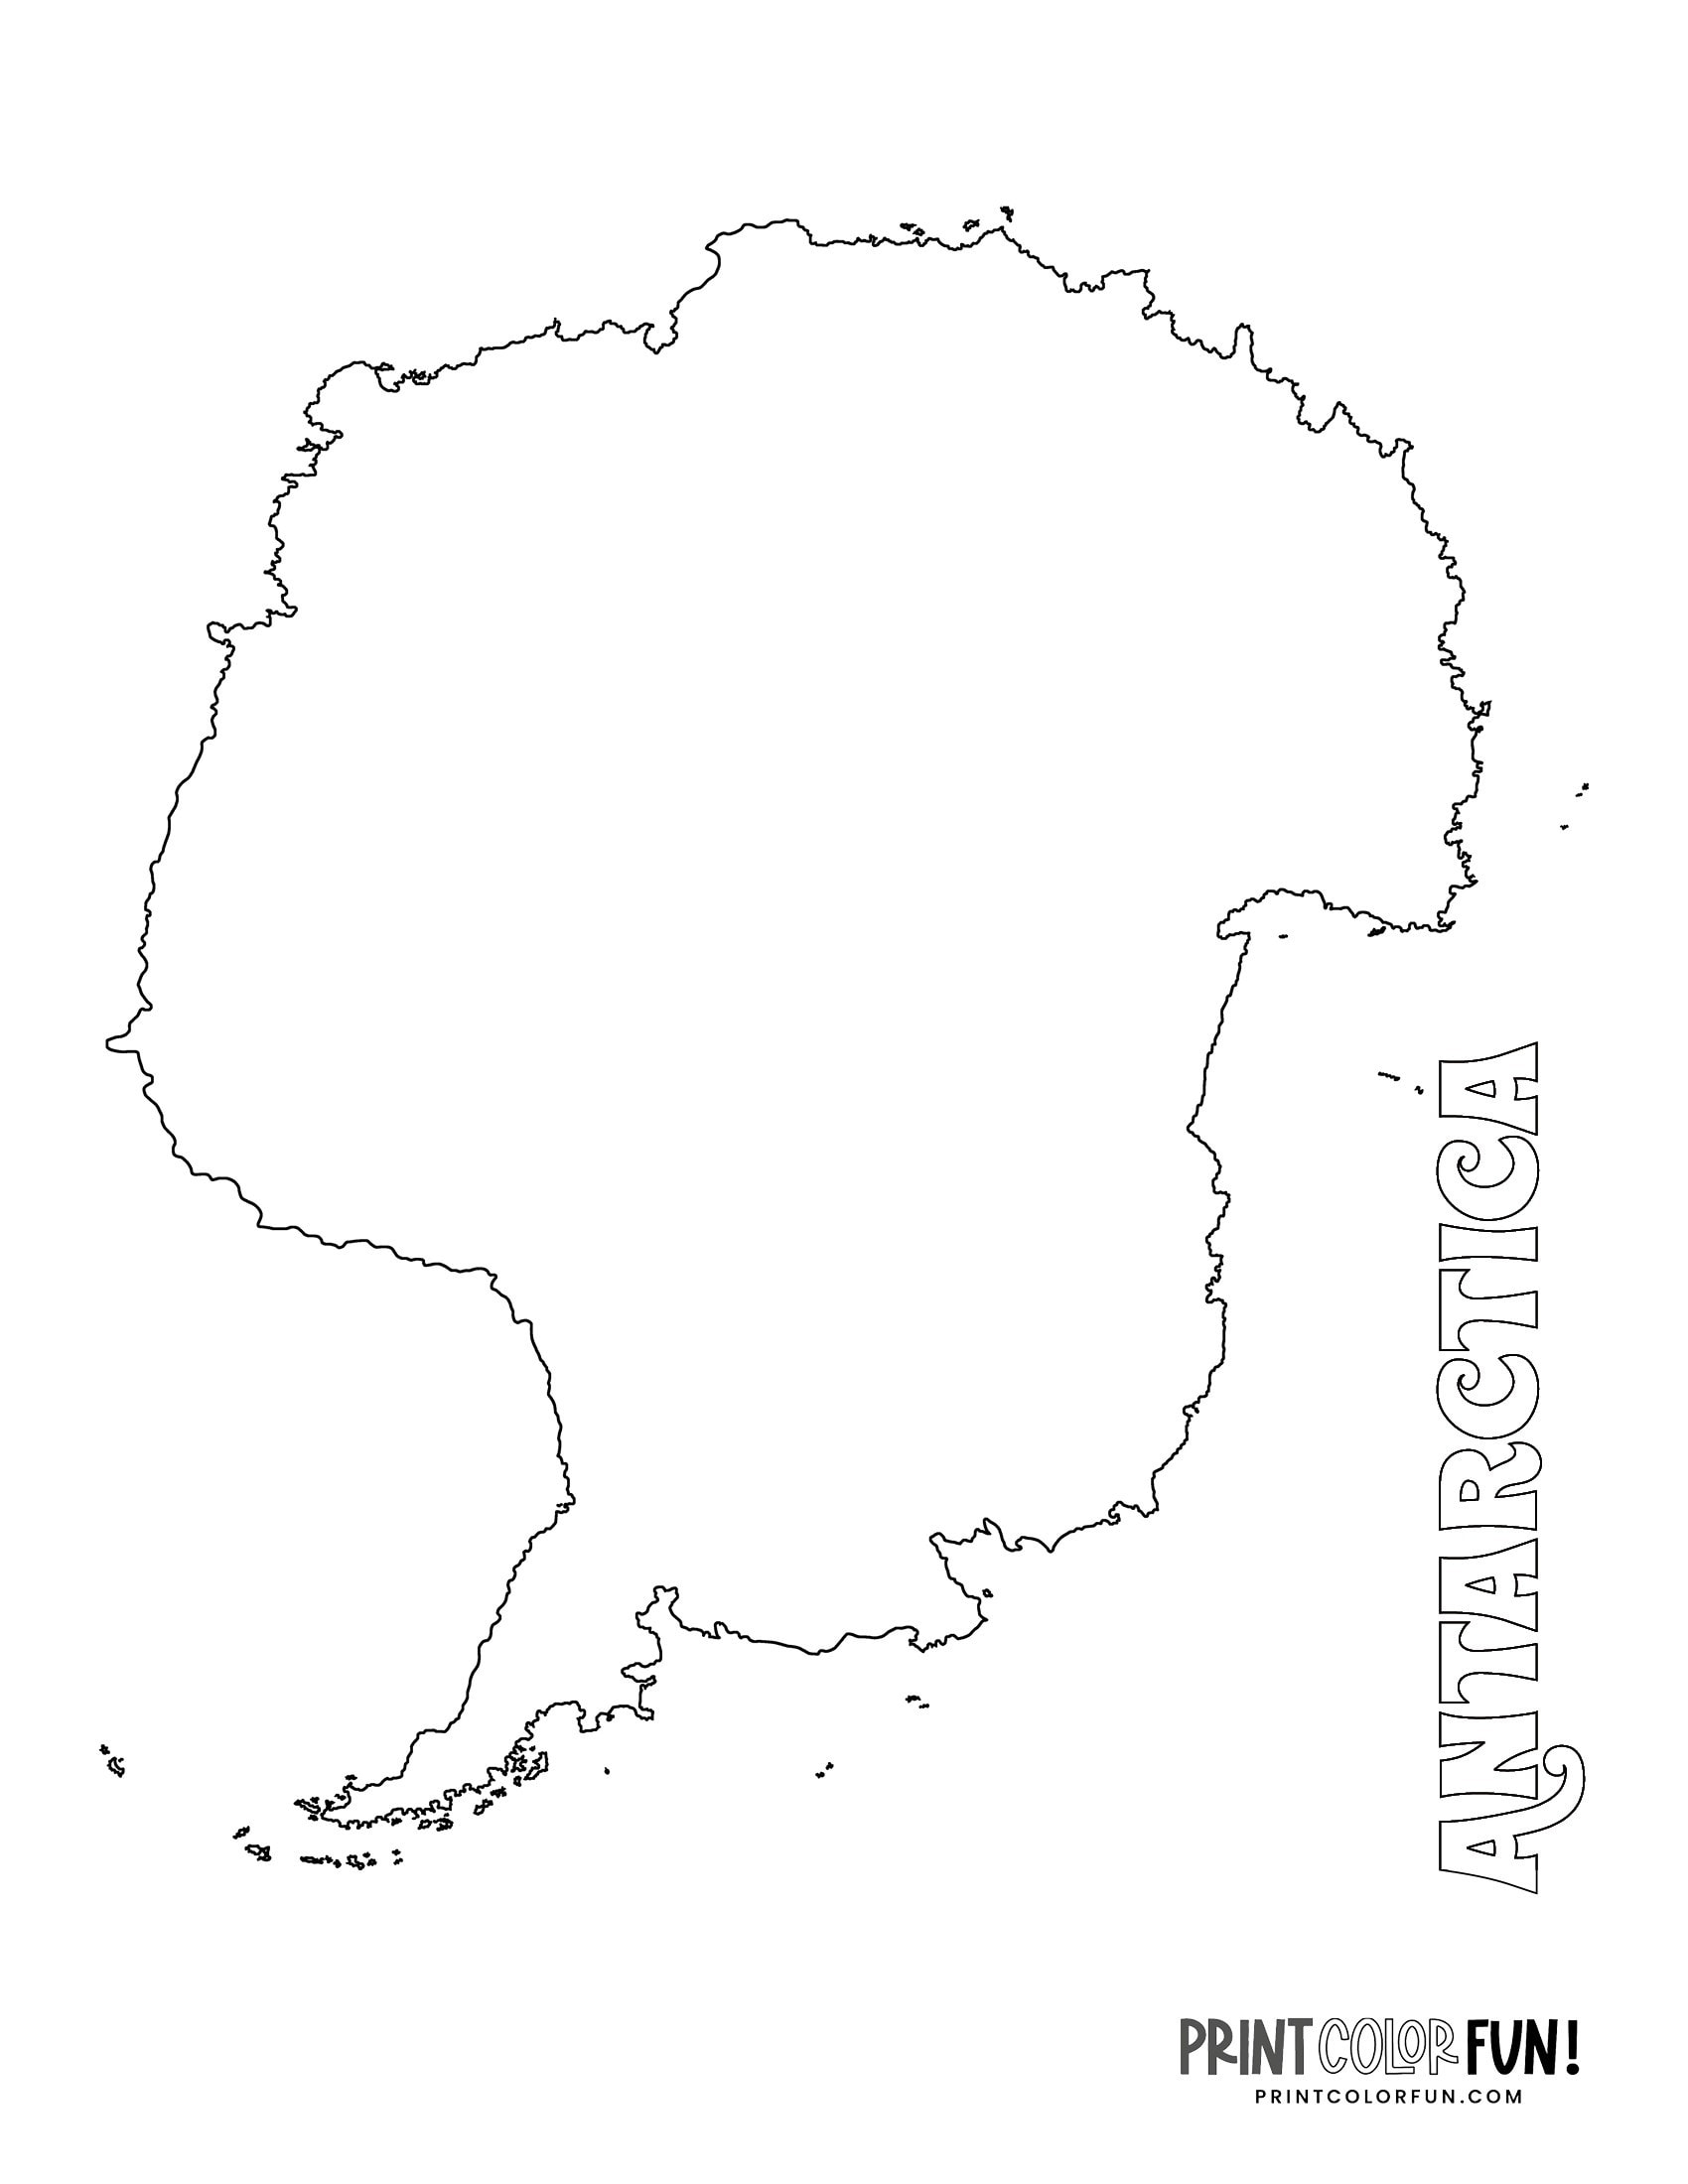 Antarctica Map Coloring Page Free Maps Coloring Pages Clipart | Images ...